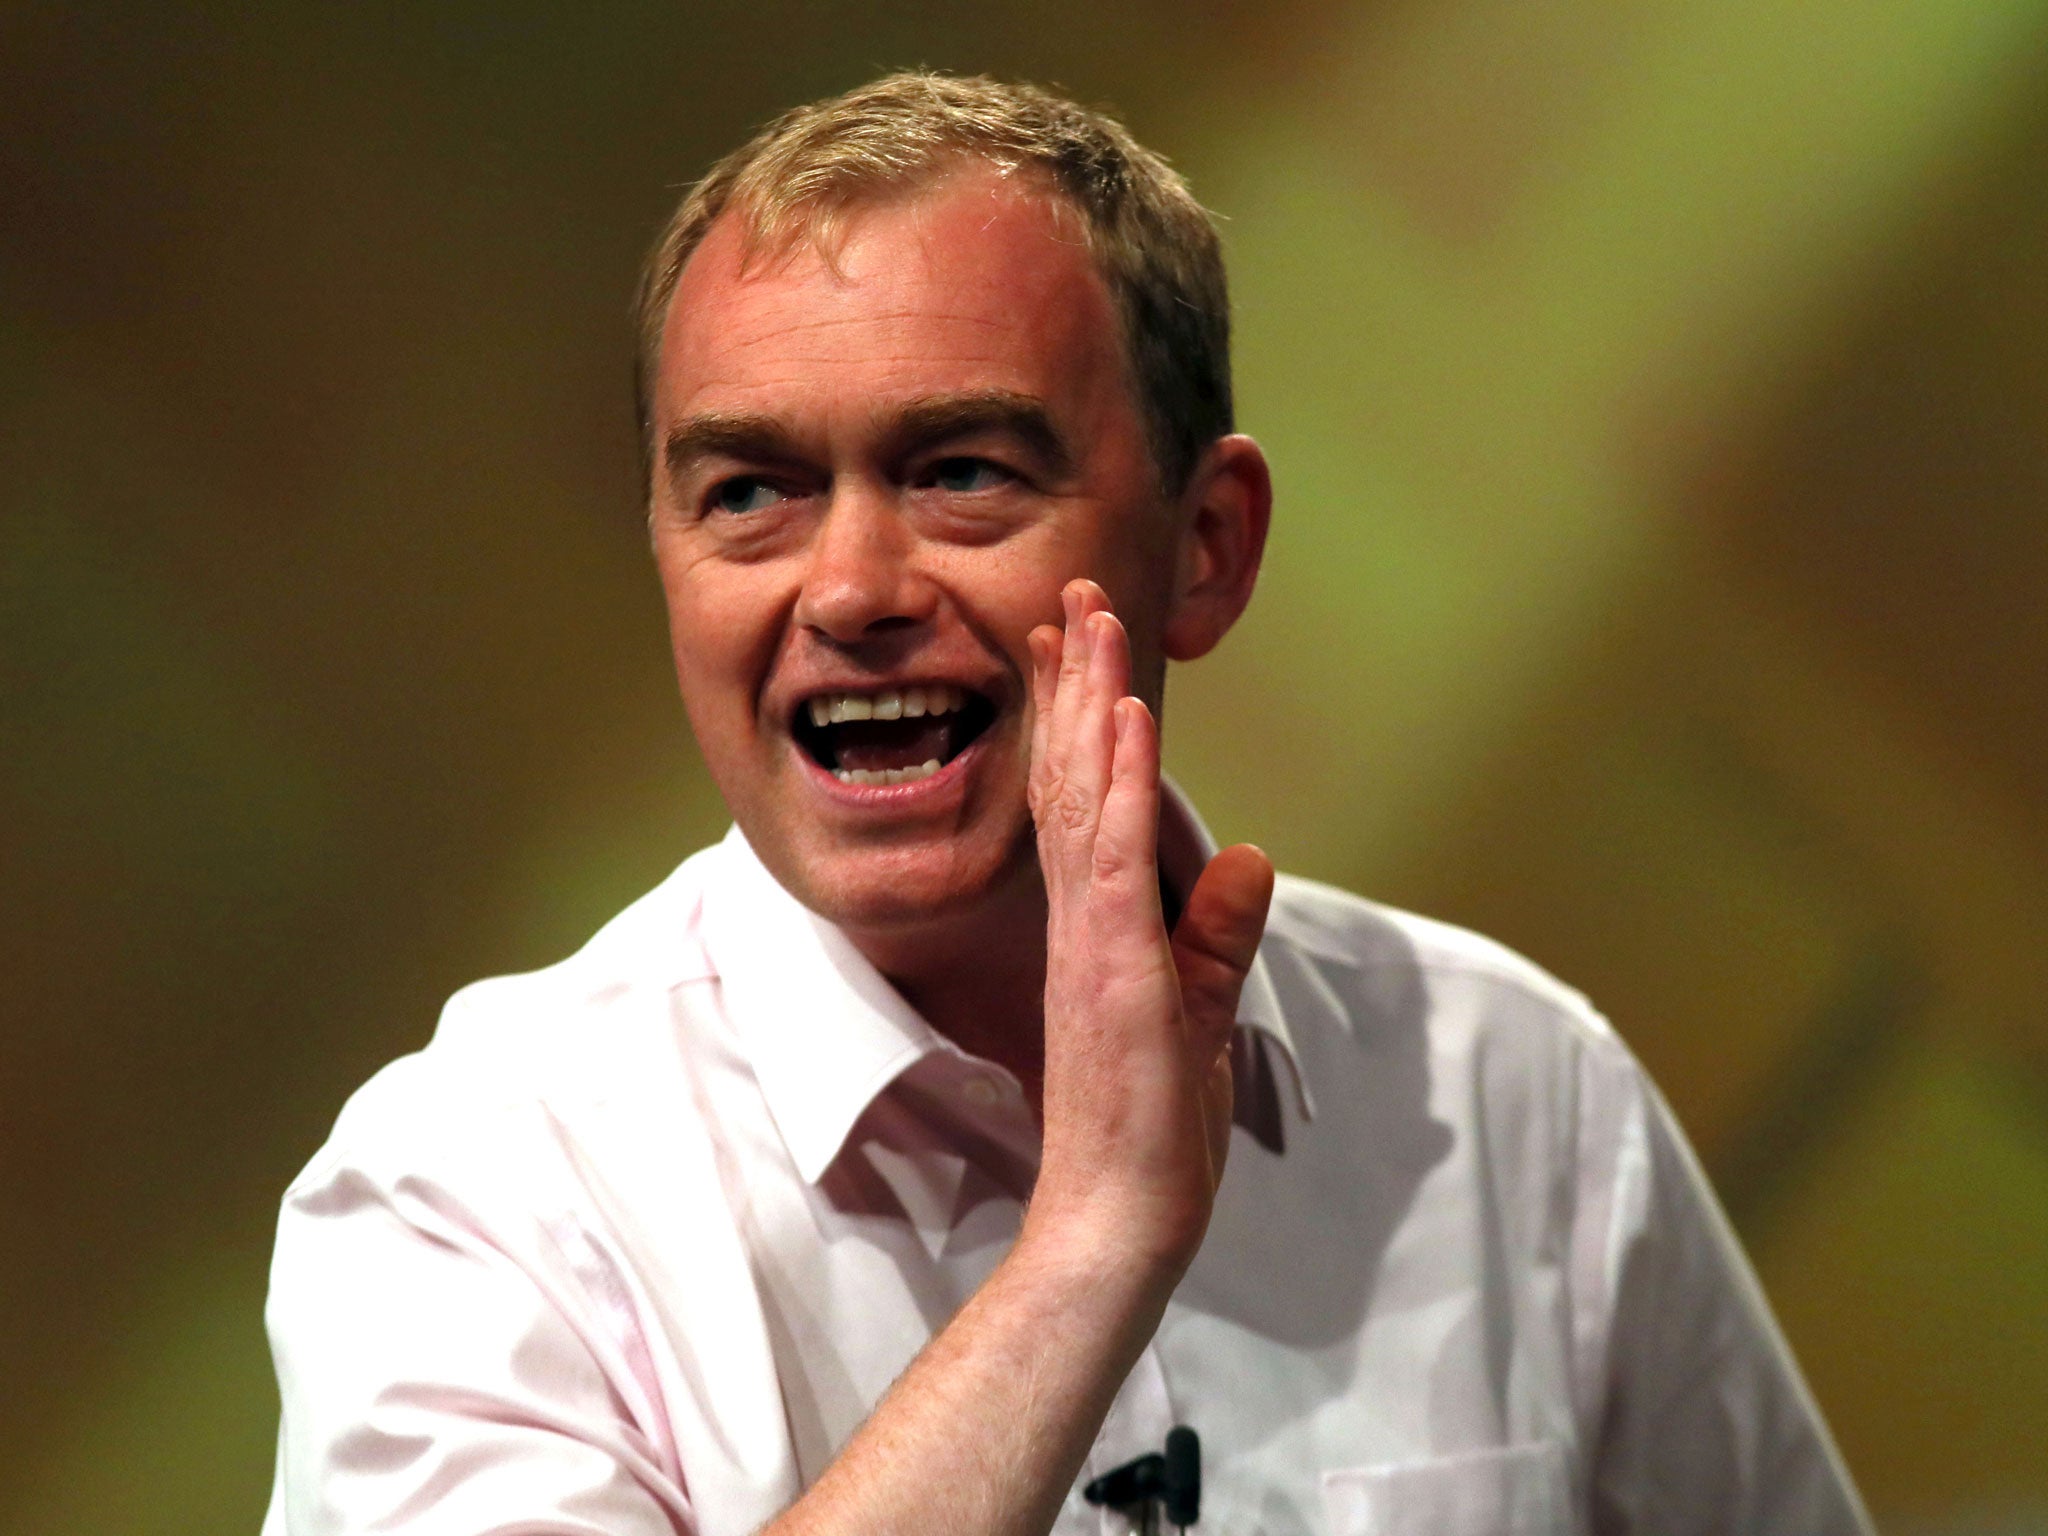 Tim Farron says the ‘Lib Dem fightback is going from strength to strength’